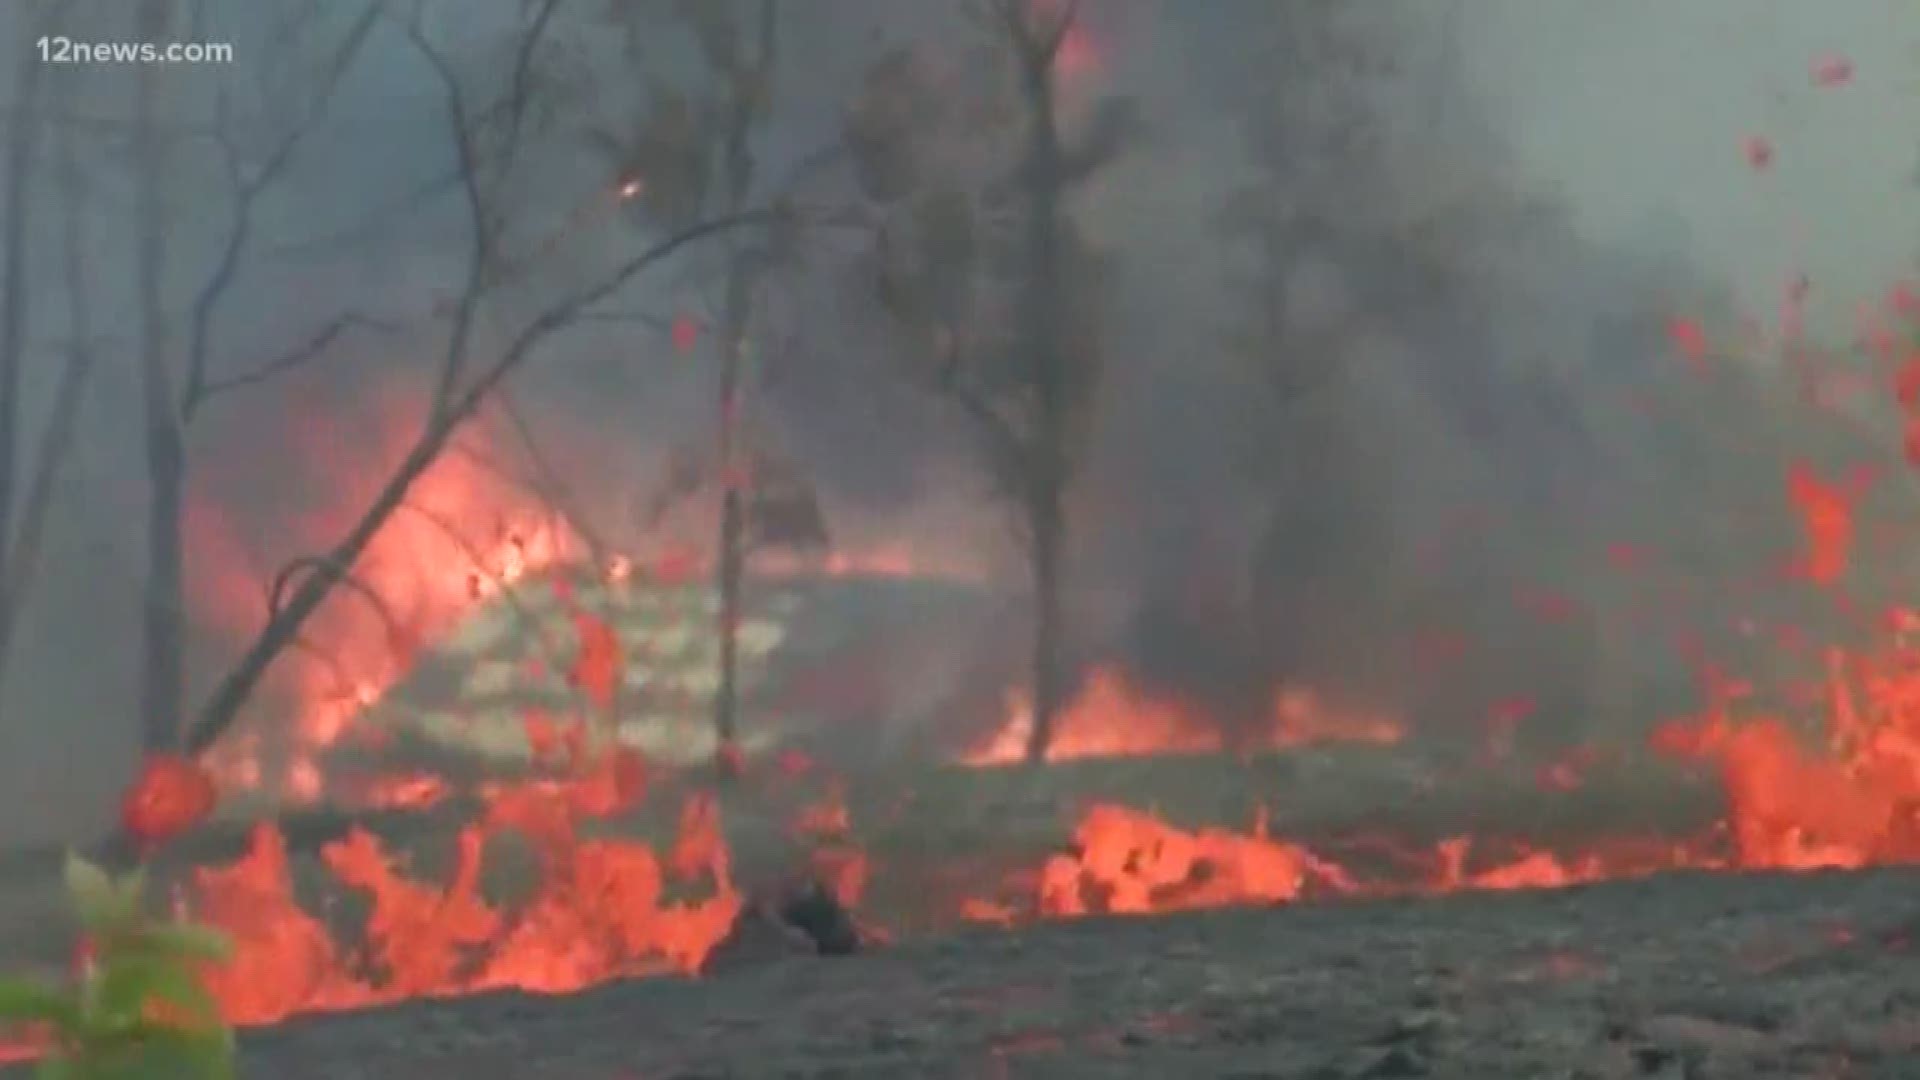 A volcanologist from Arizona is helping efforts in Hawaii as the Kilauea volcano erupts.